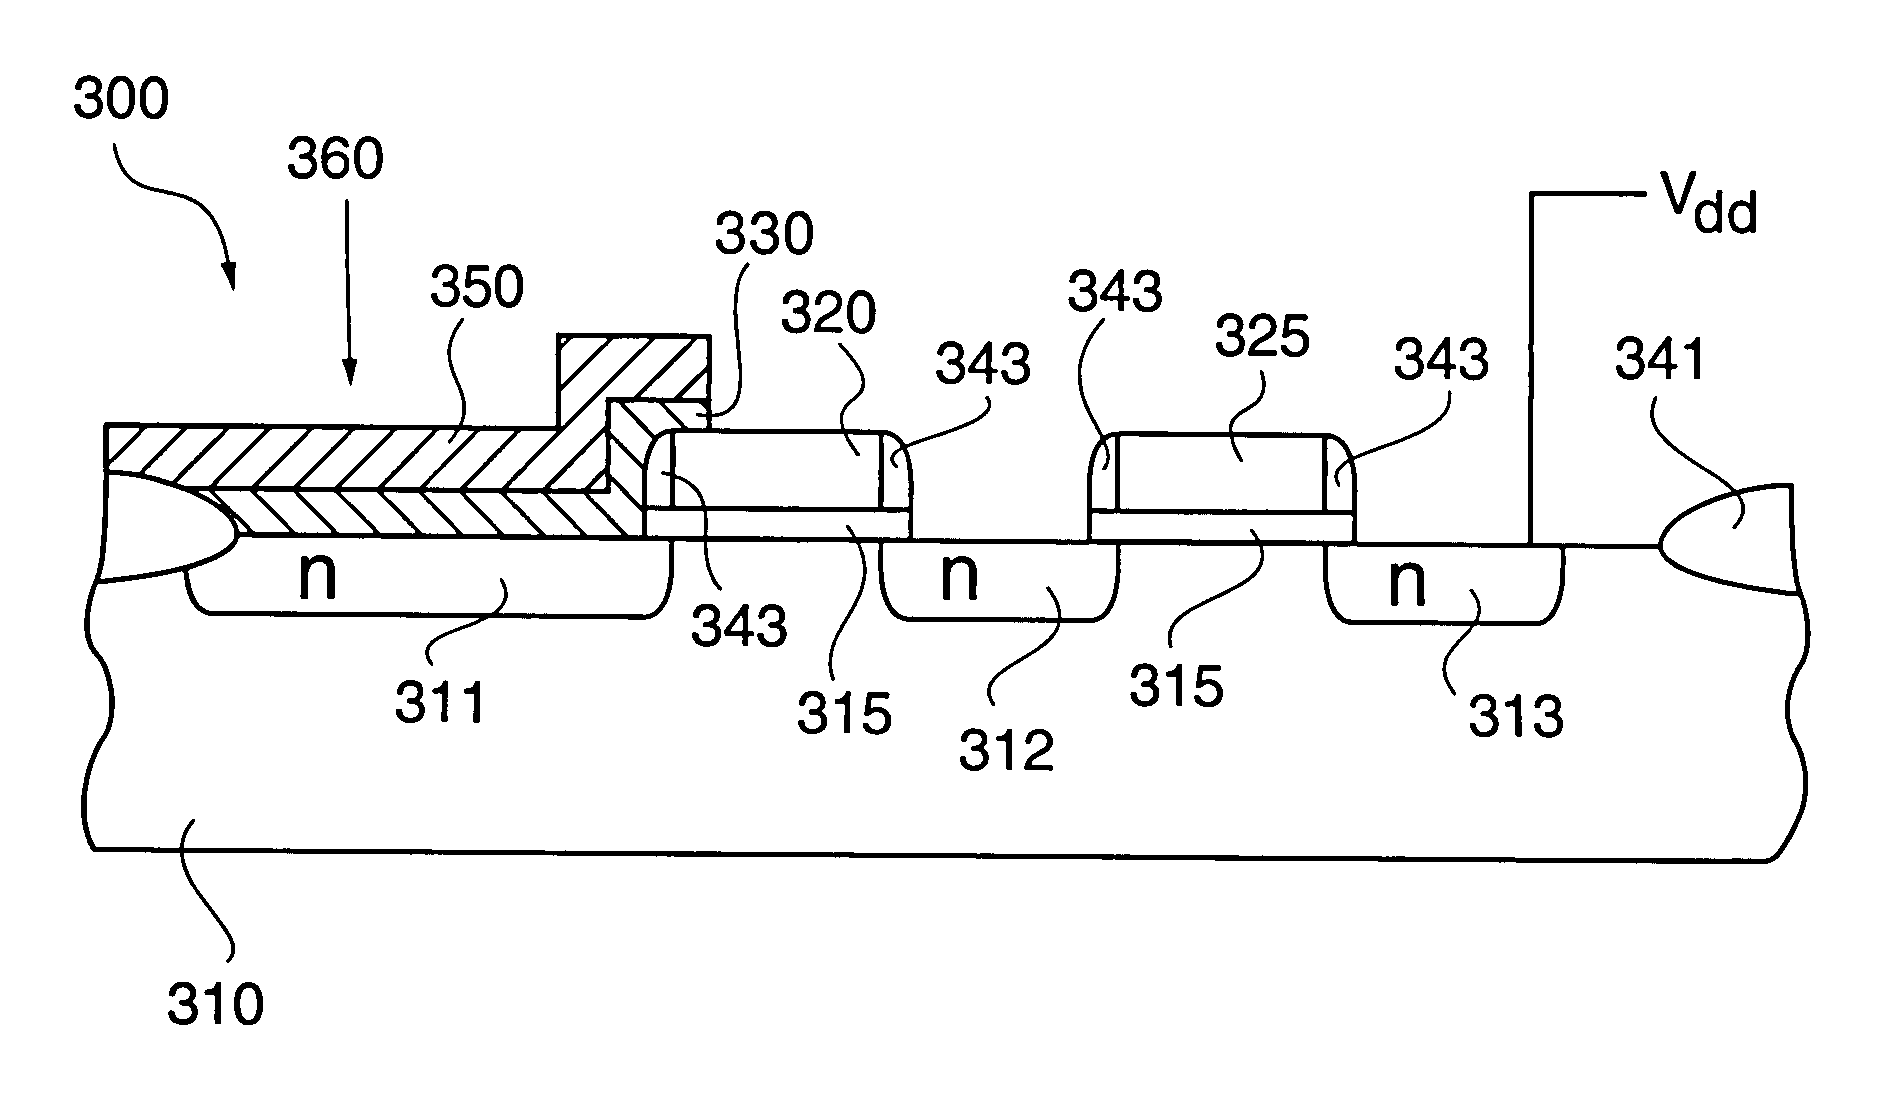 CMOS imager having a nitride dielectric